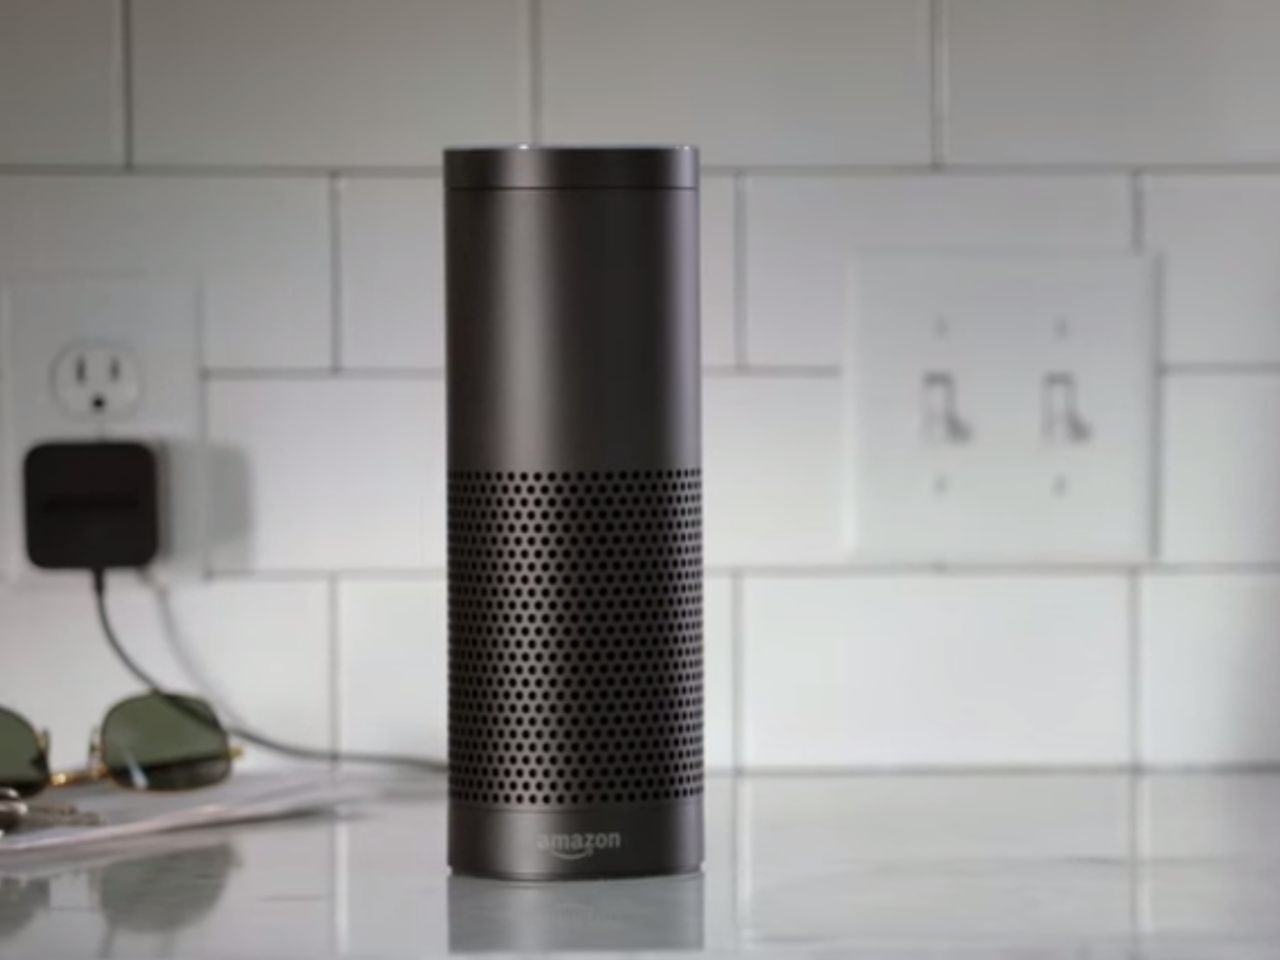 Amazon Echo owners can now control WeMo and Philips Hue devices with their voice